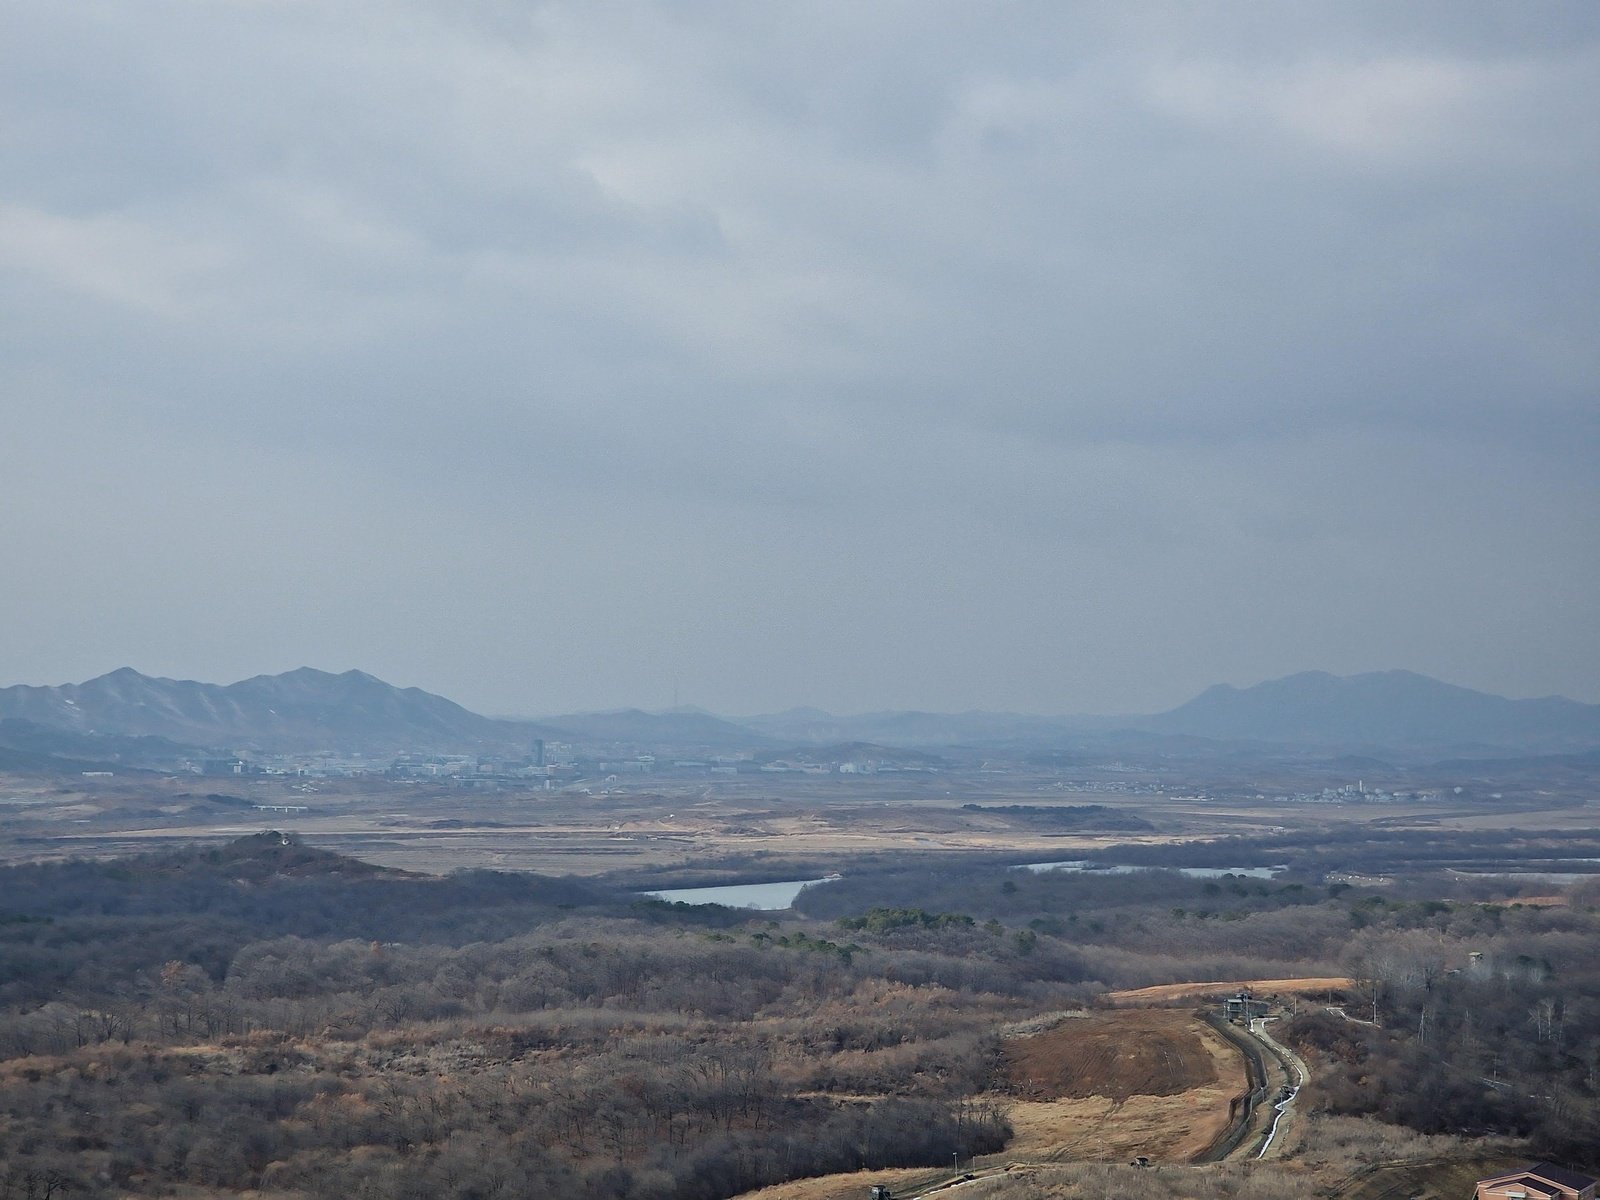 a grey, barren landscape with mountains in the distance